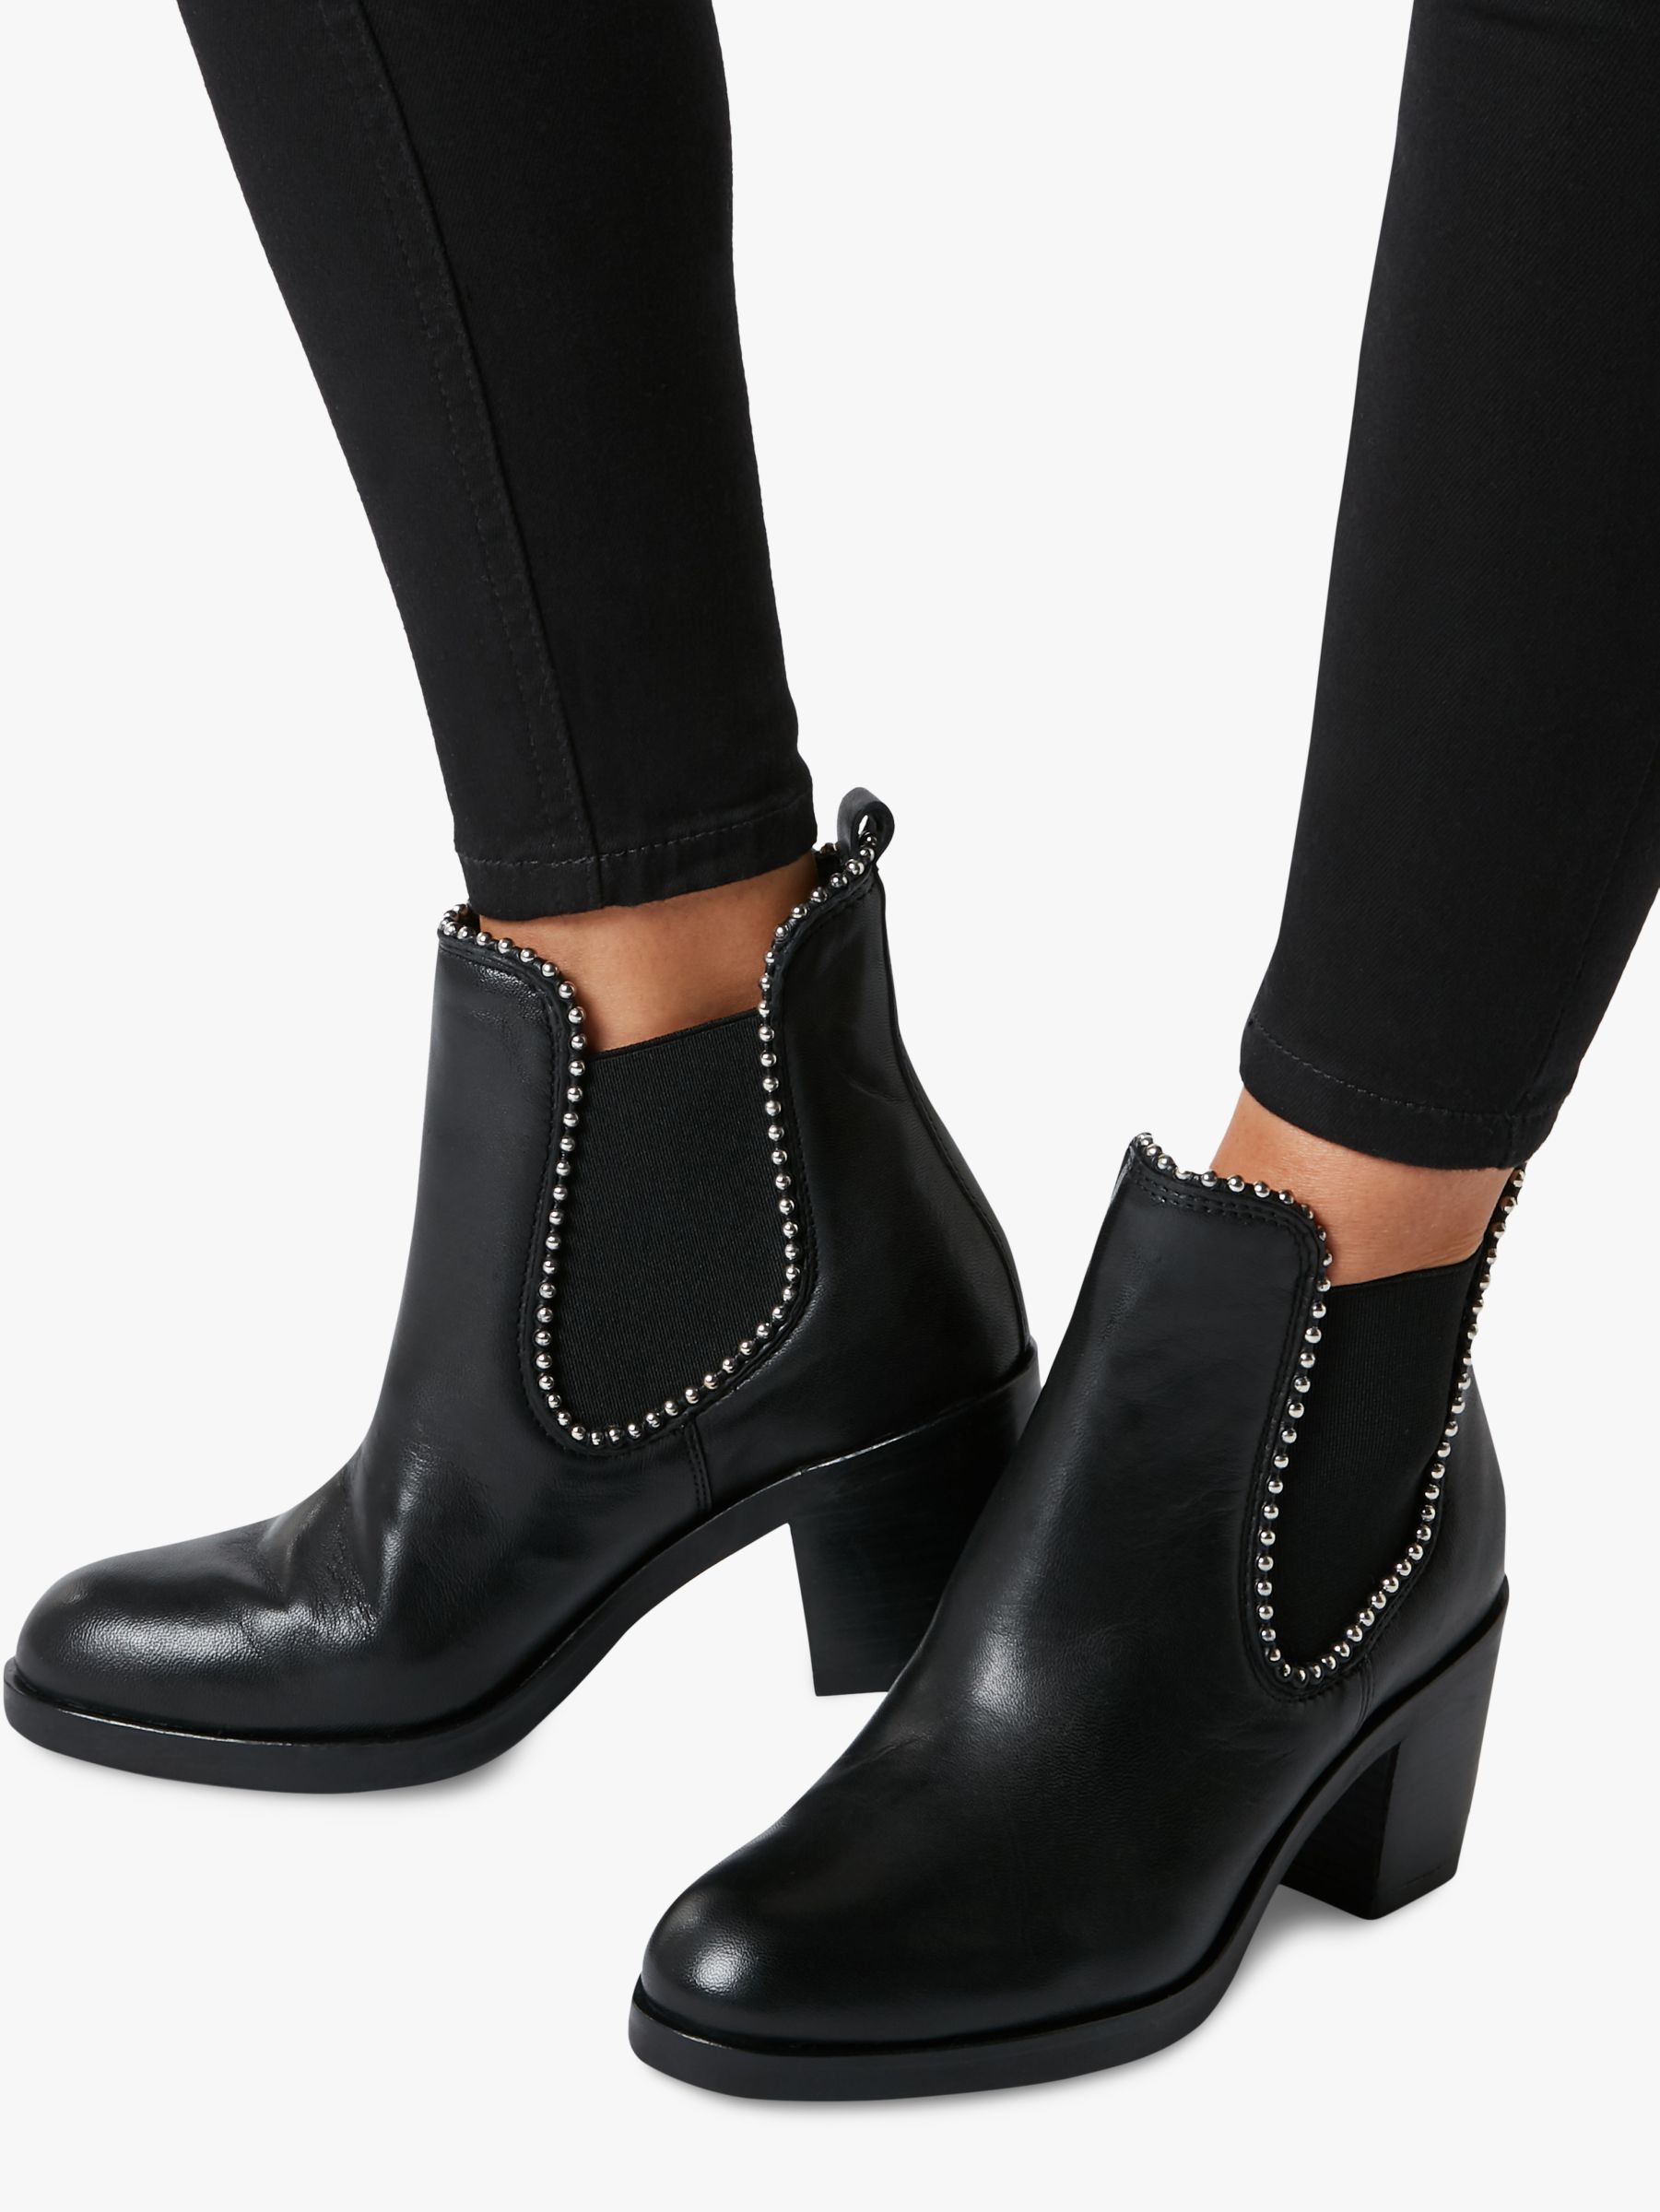 Dune Black Paxtton Ball Stud Ankle Boots, Black Leather